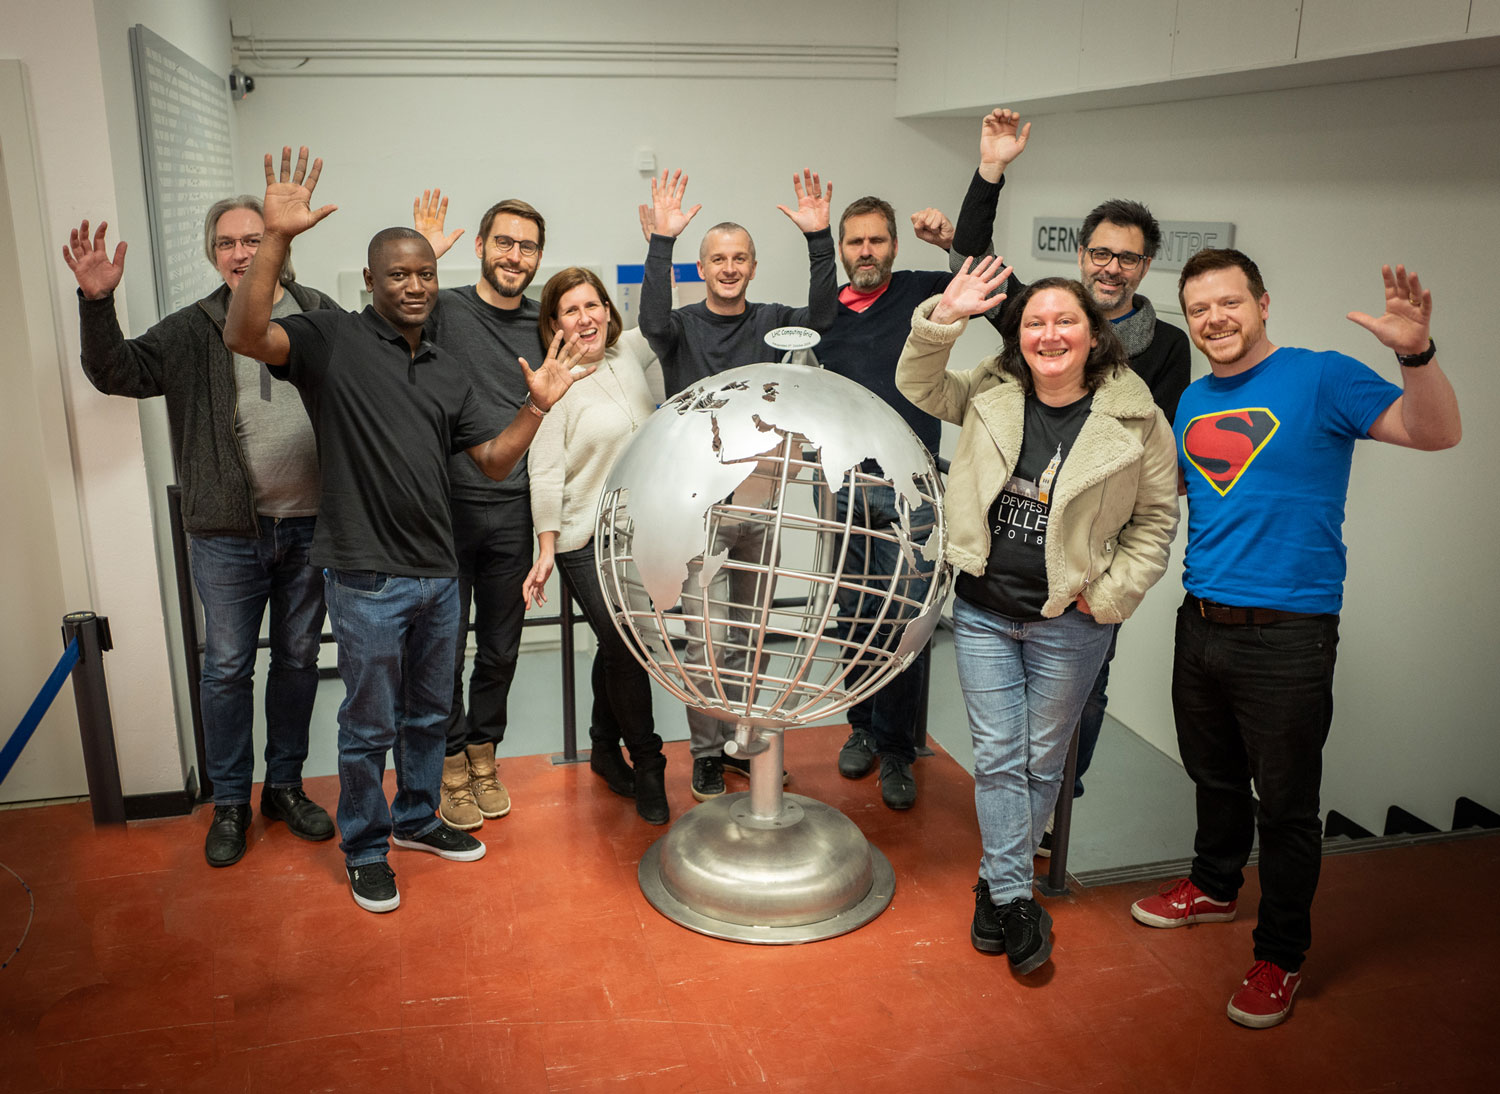 The team gathered around a globe in the basement of the CERN Data Centre. They’re smiling and their arms are raised in celebration.